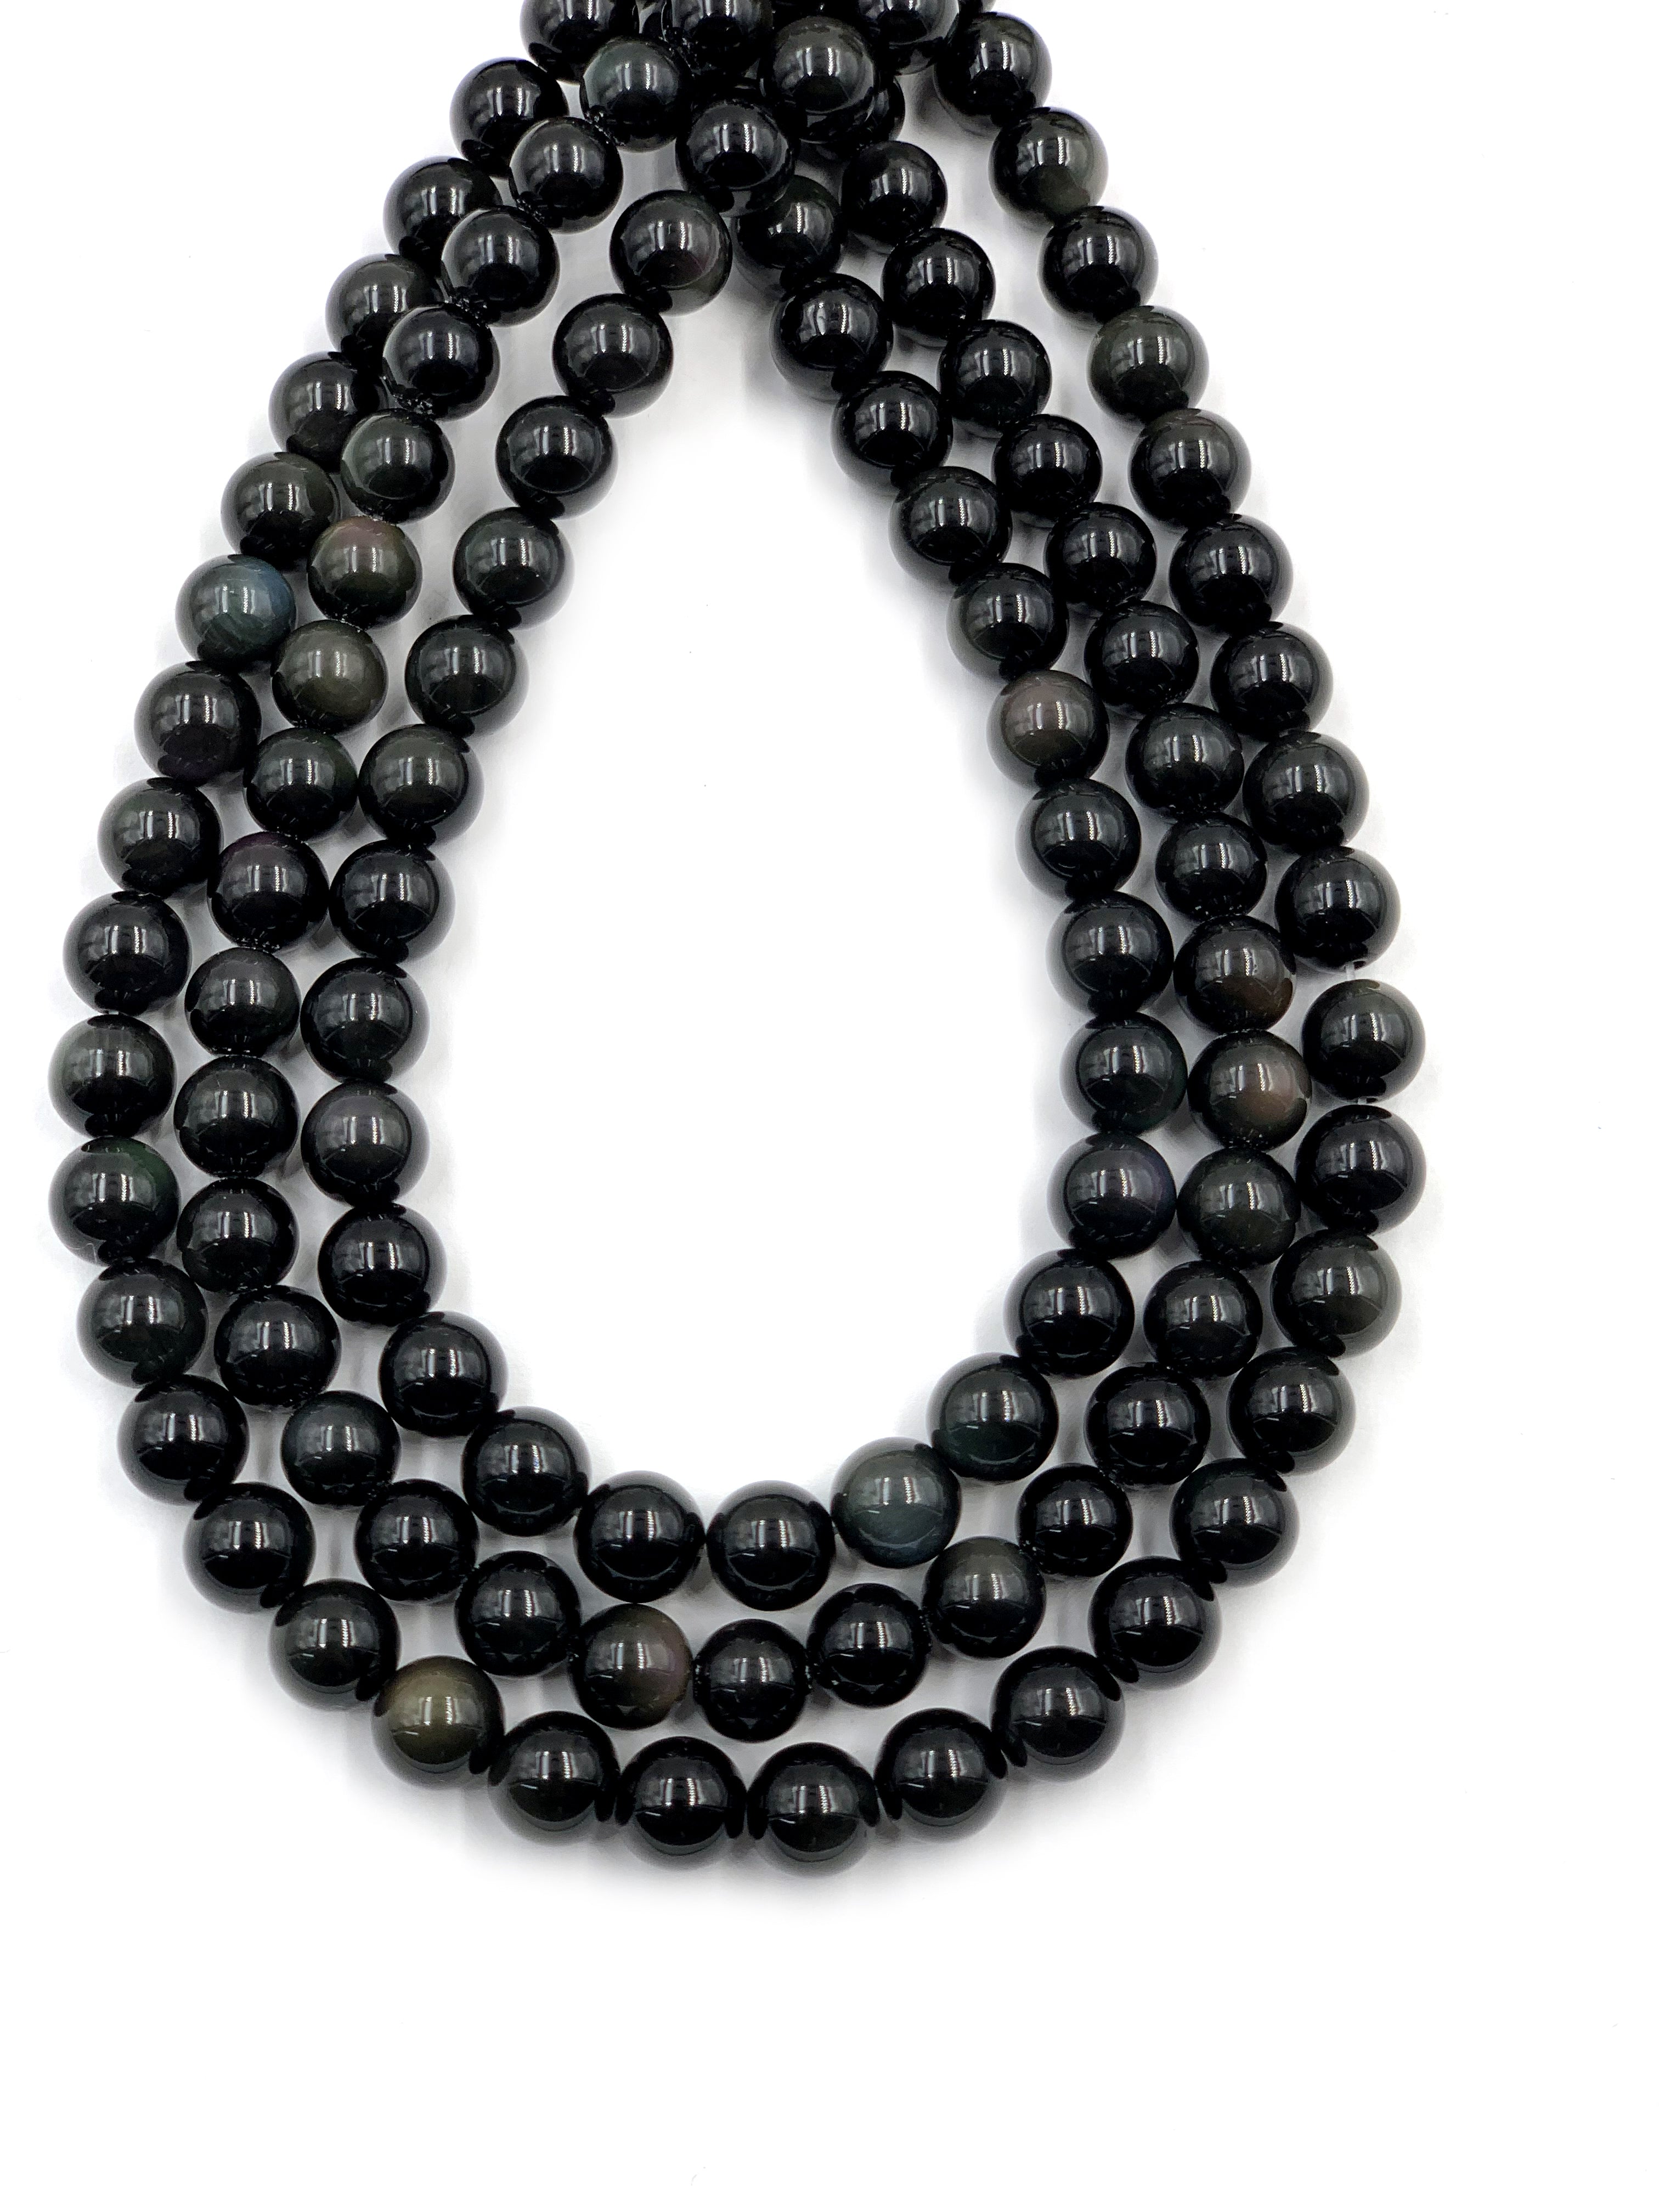 10 MM Rainbow Black Obsidian Smooth Round Beads 15 Inches Strand